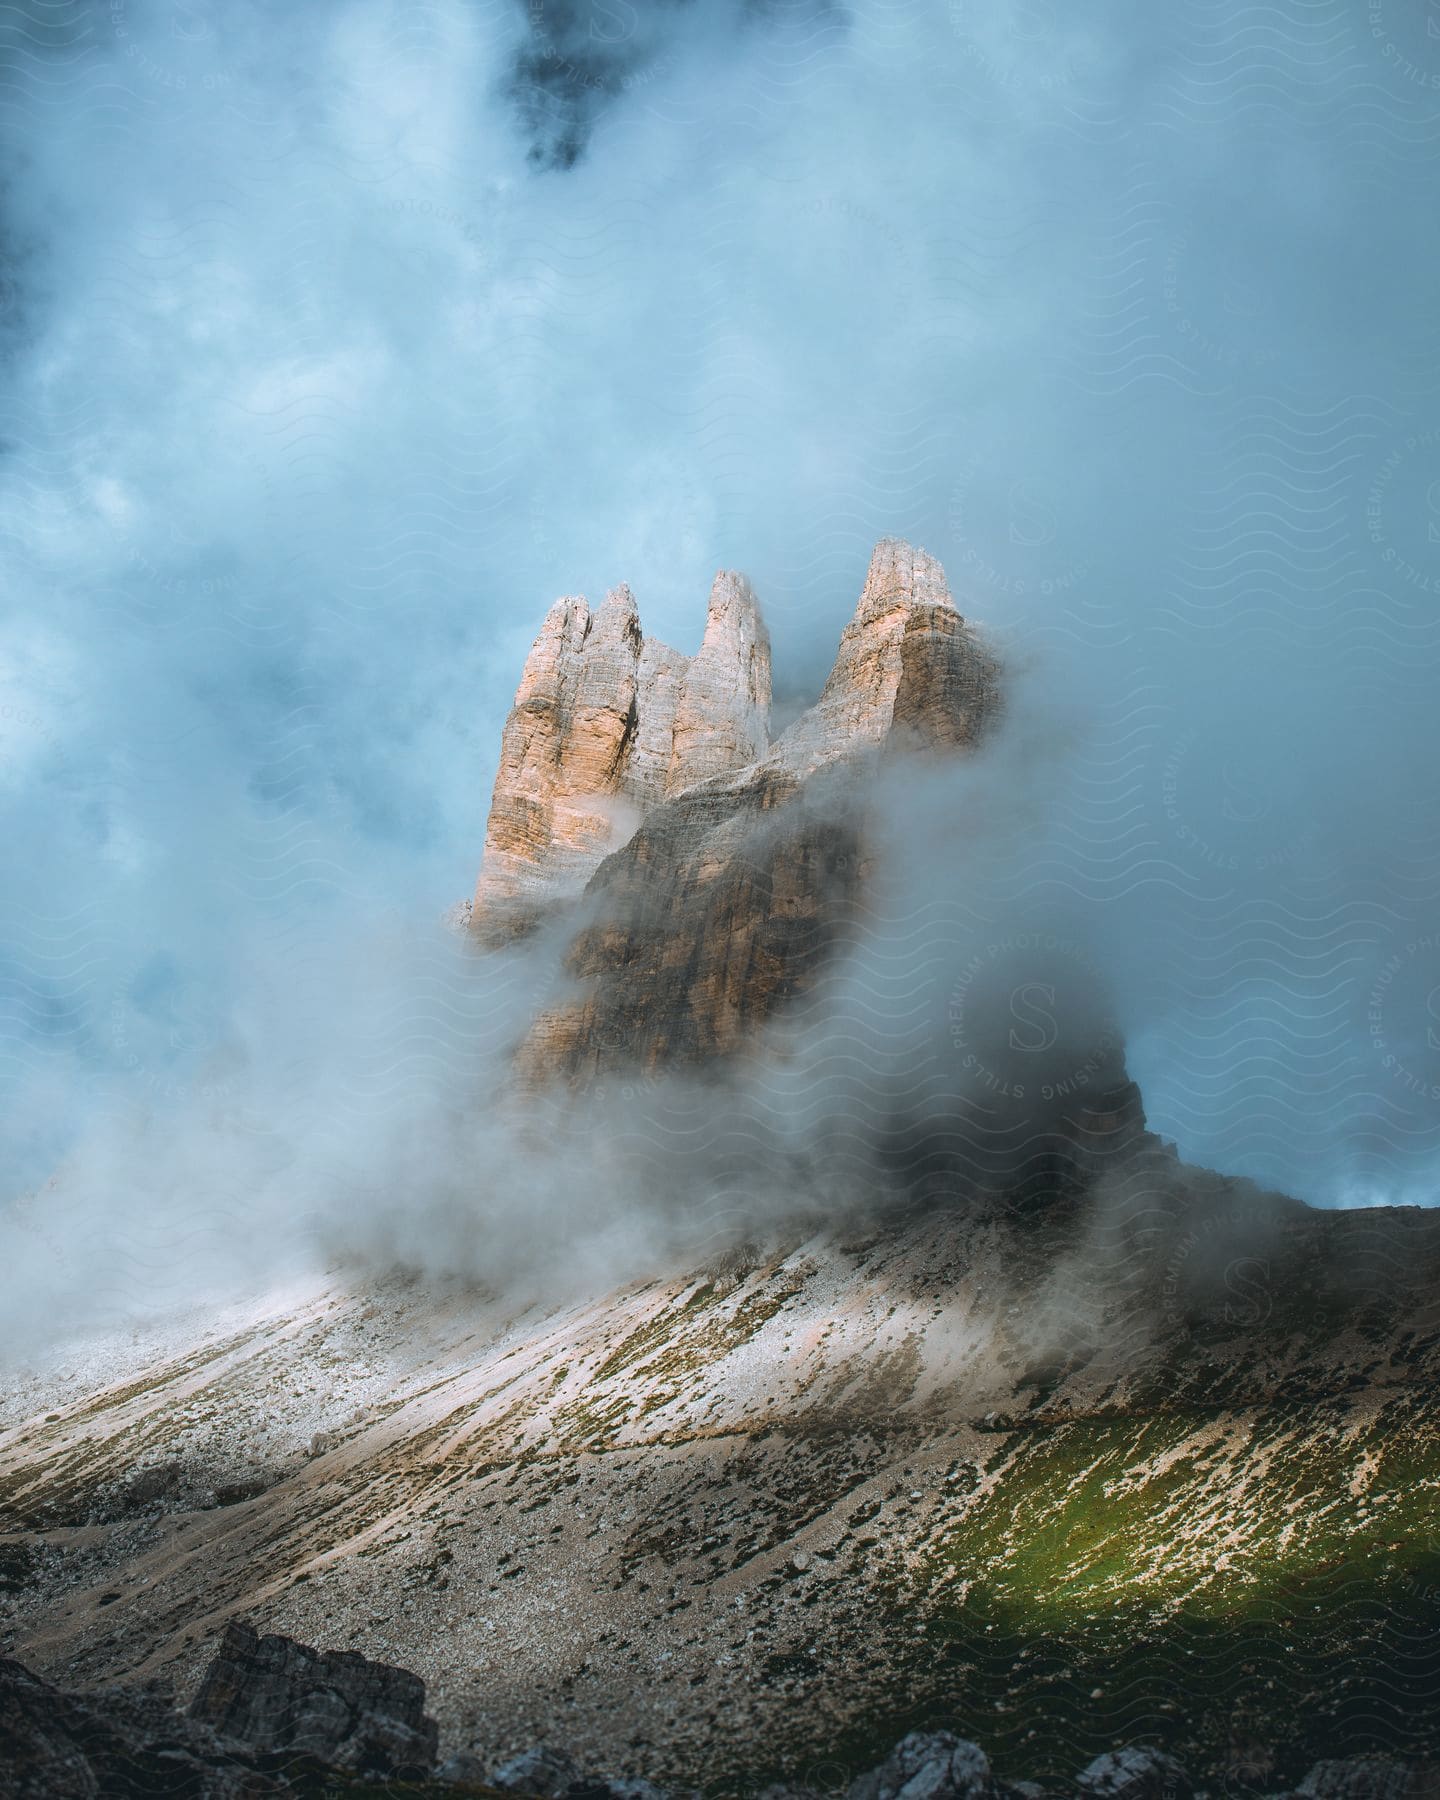 Clouds cover rock formations on a mountain under a sunny sky